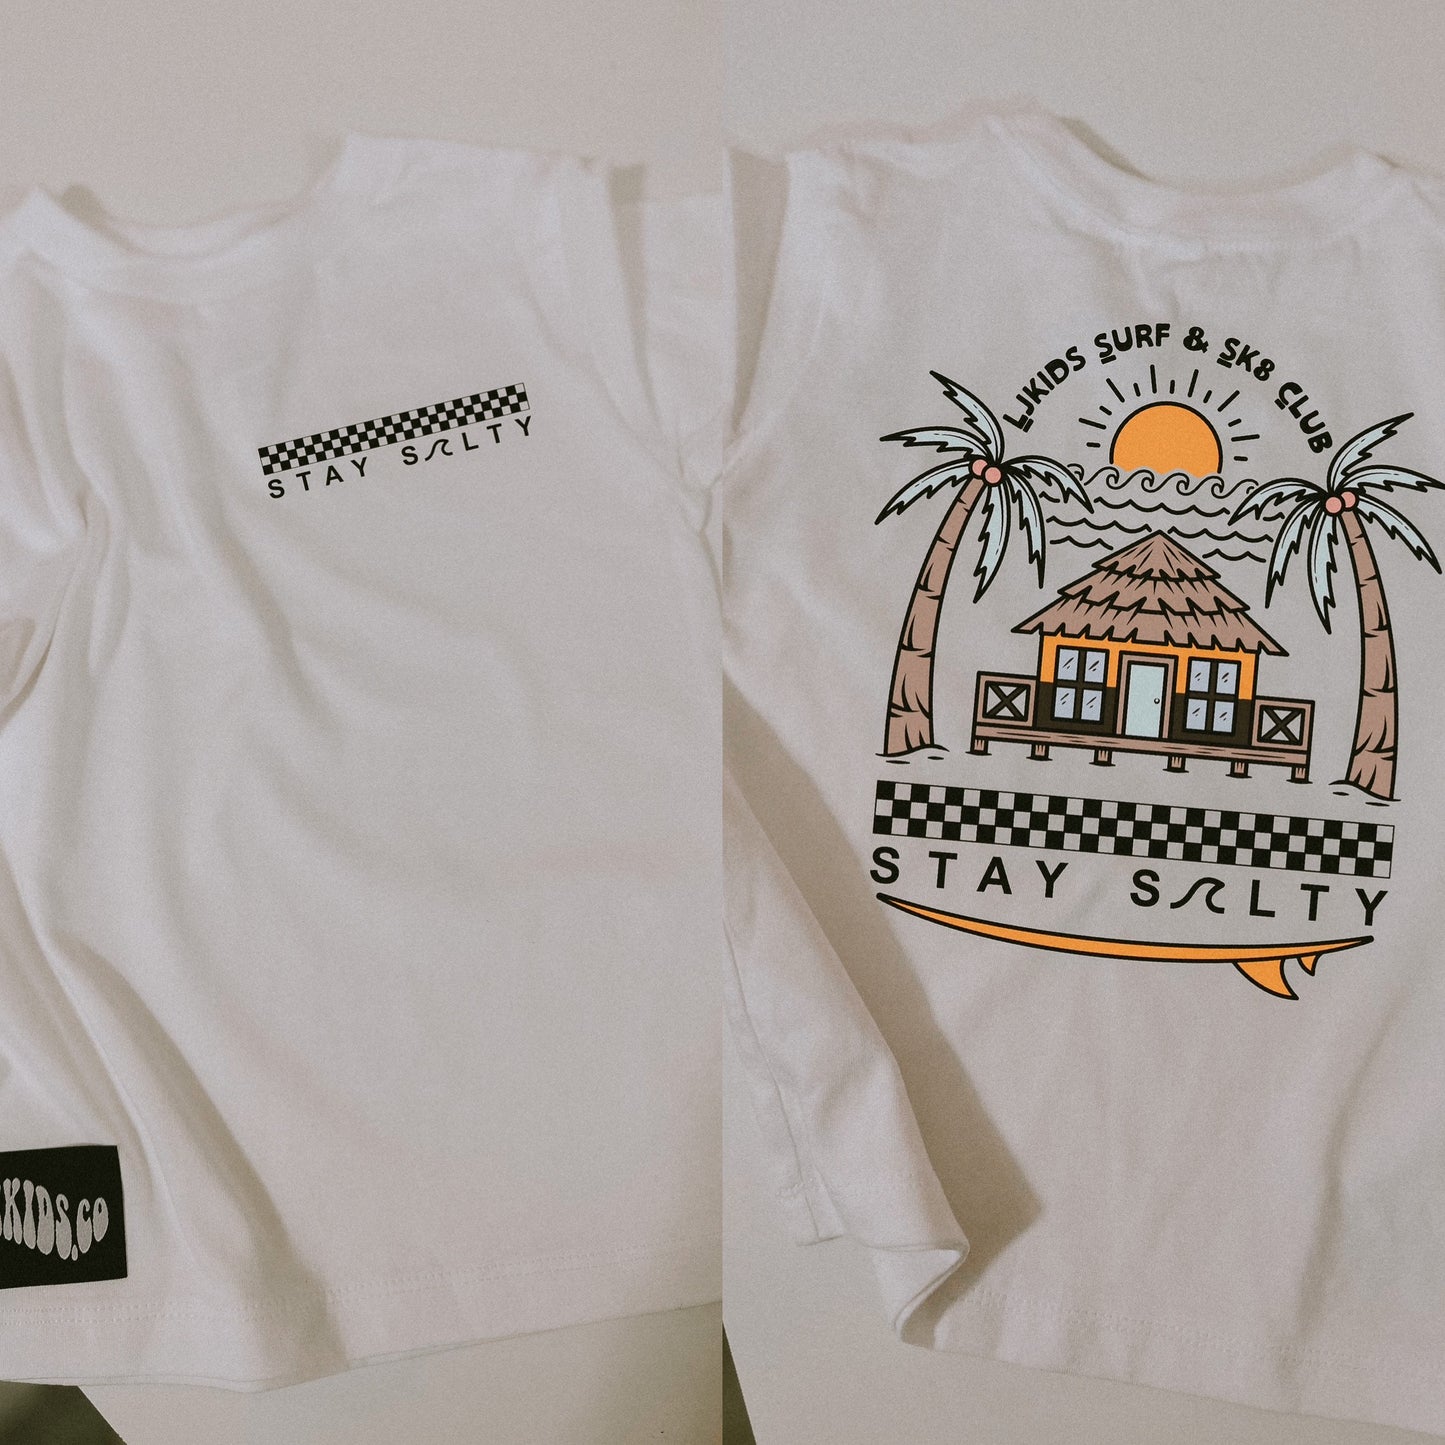 Surf & Skate Club Tee (Front And Back) (Tan Or White Tee)